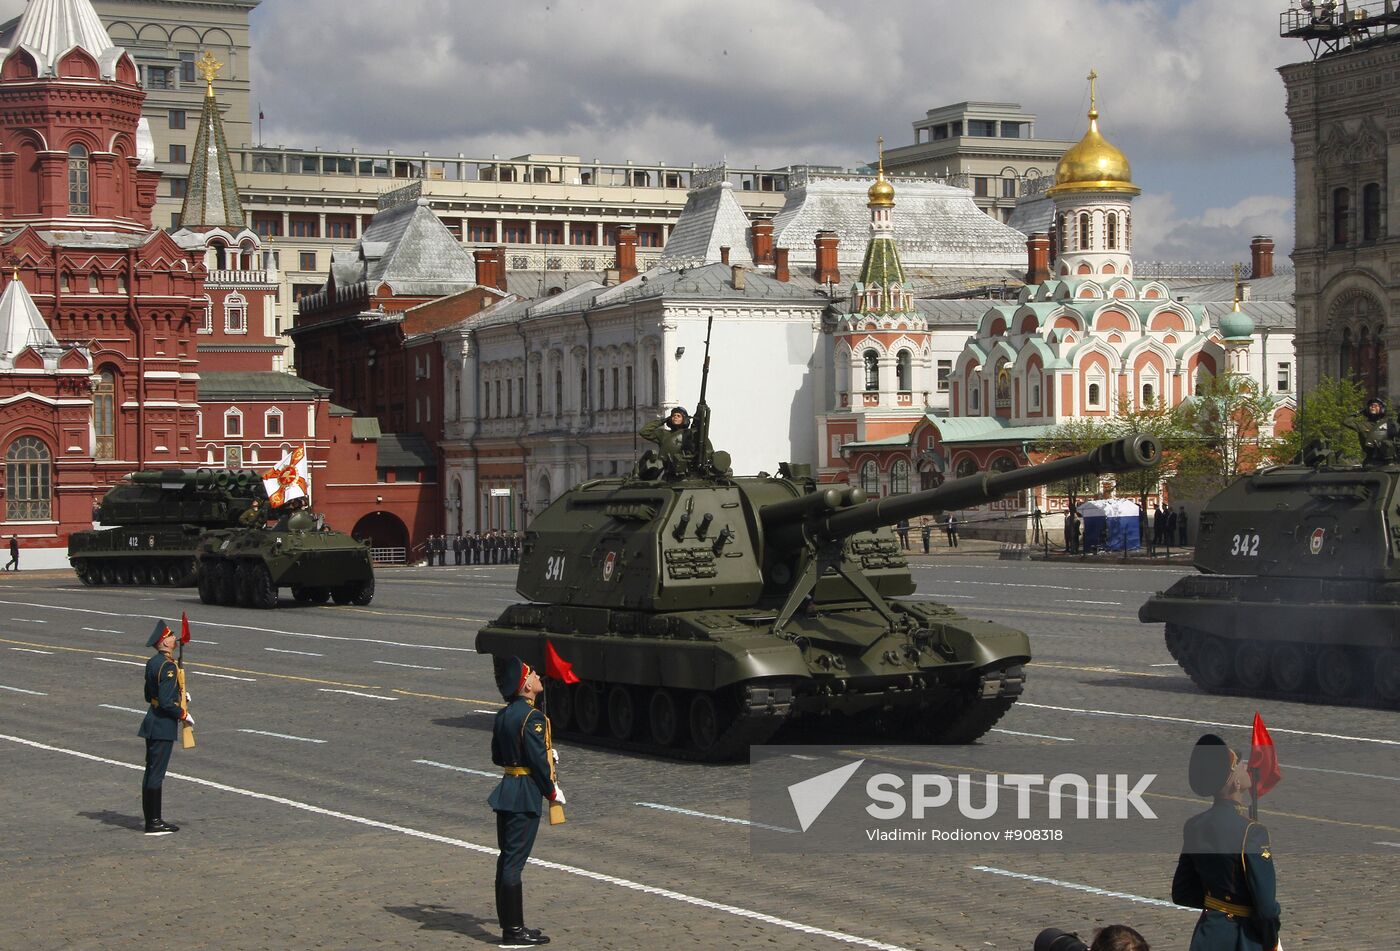 Military parade held on the 66th anniversary of WWII